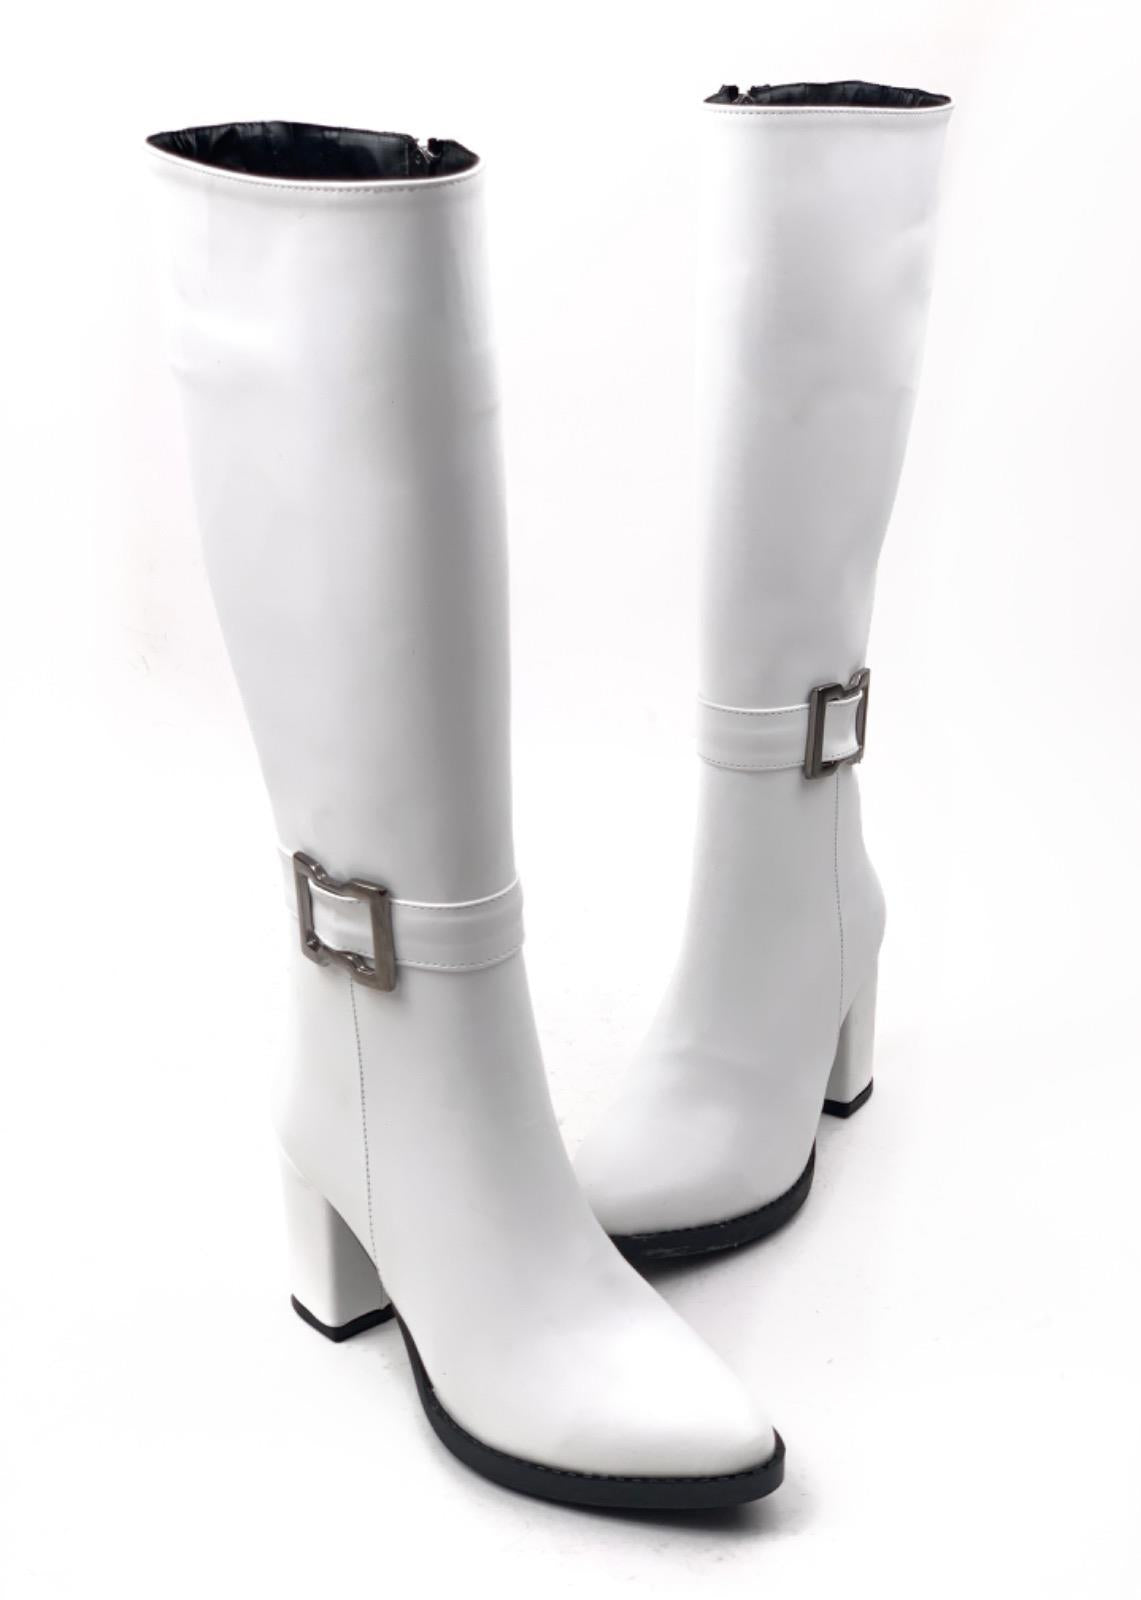 Women's White Parg Below Knee Buckled Leather Look Boots - STREETMODE ™